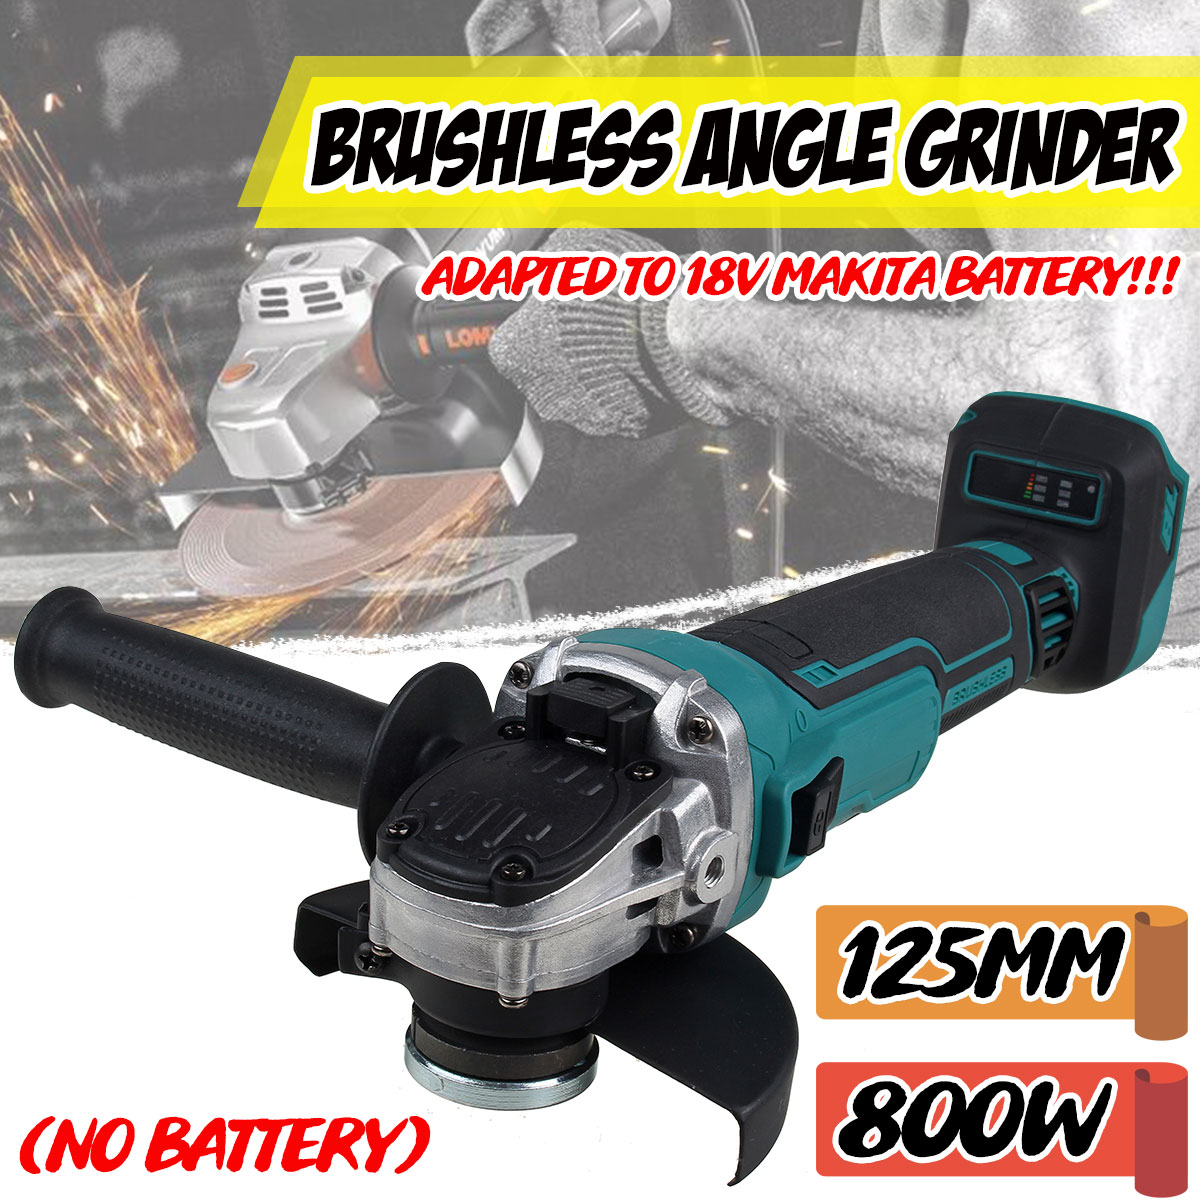 125mm-800W-Cordless-Brushless-Angle-Grinder-Cutting-Tool-Variable-Speed-Electric-Polisher-For-Makita-1825761-1